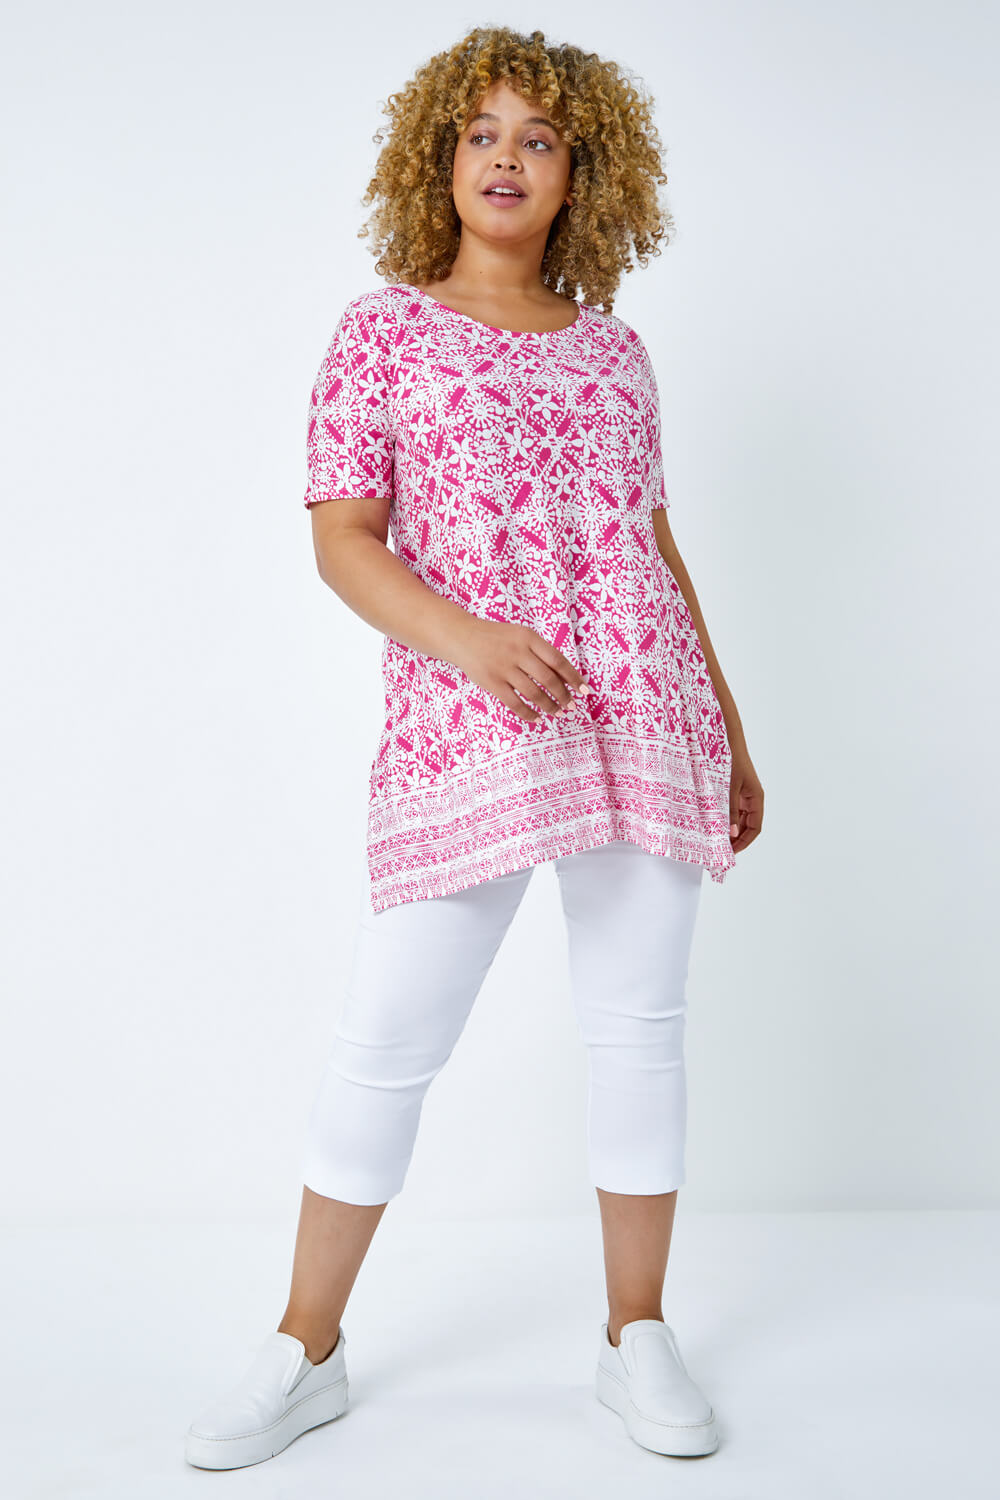 PINK Curve Tile Print Stretch Top, Image 4 of 5